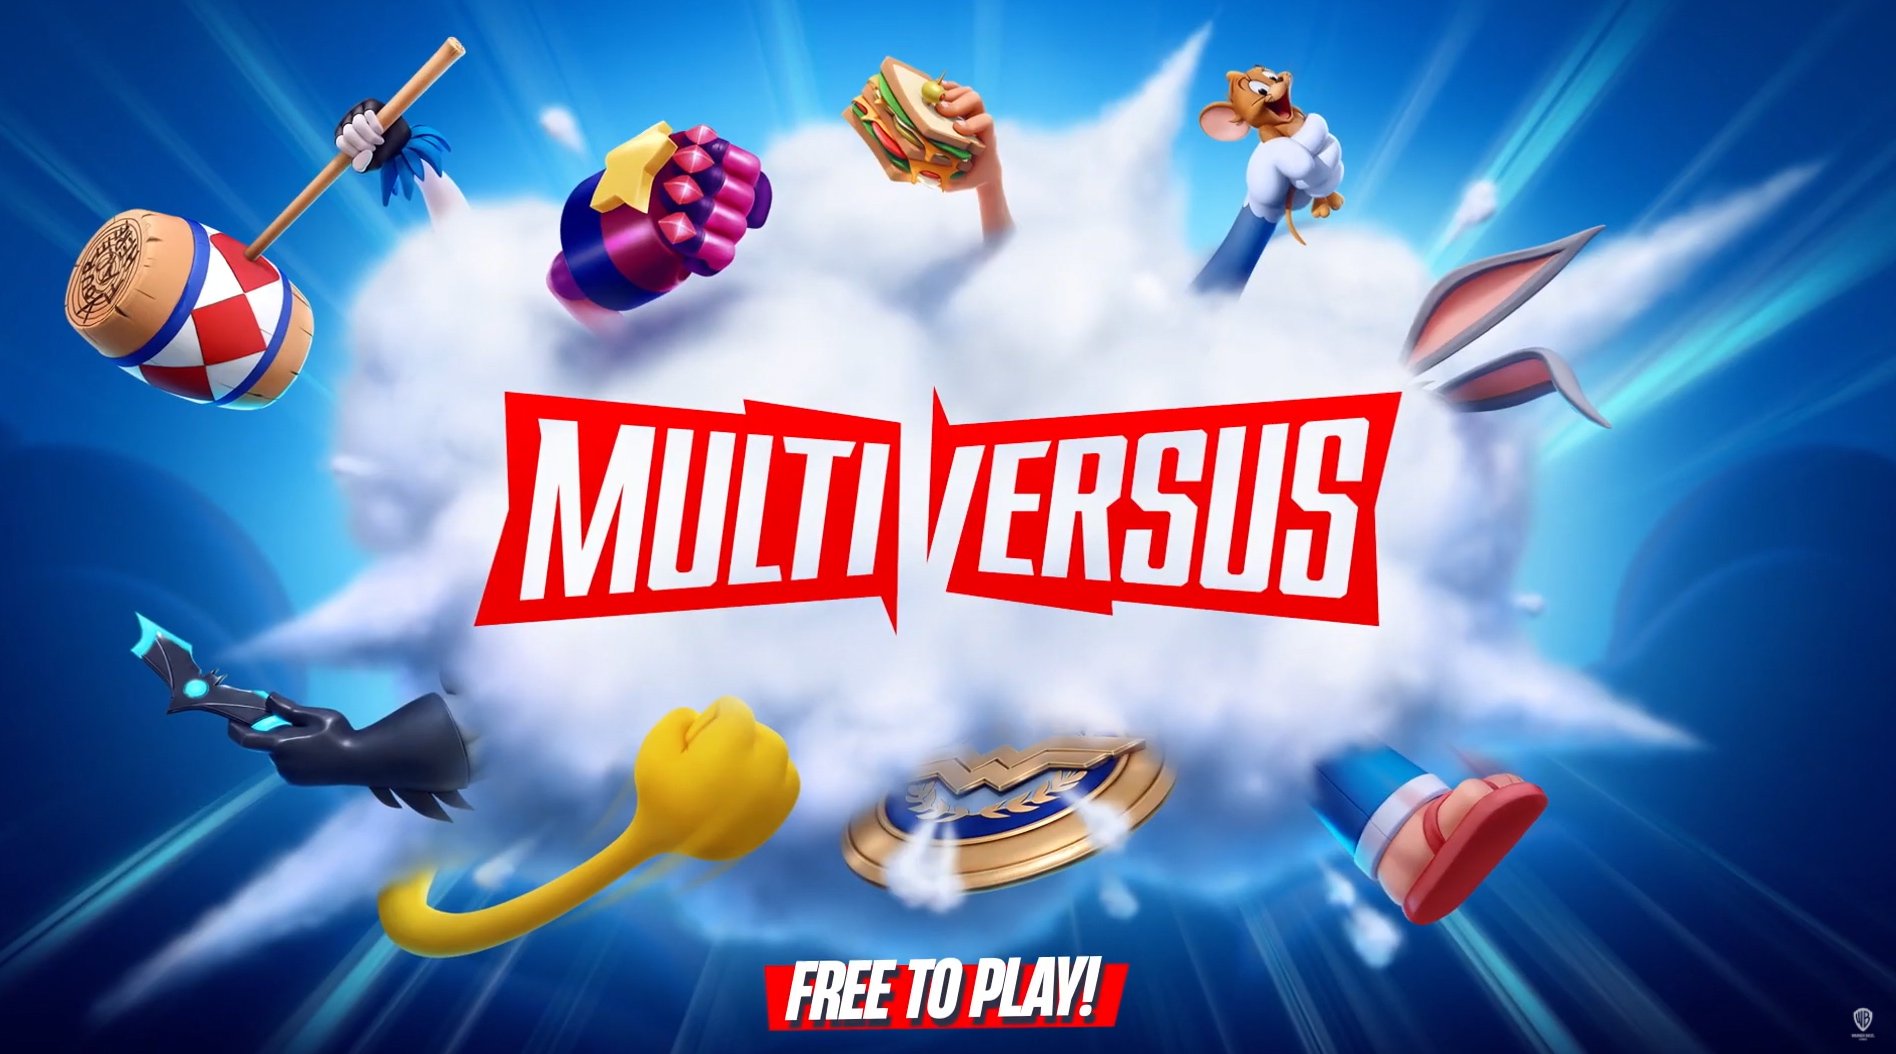 Warner Bros Games officially announces Multiversus, its free-to